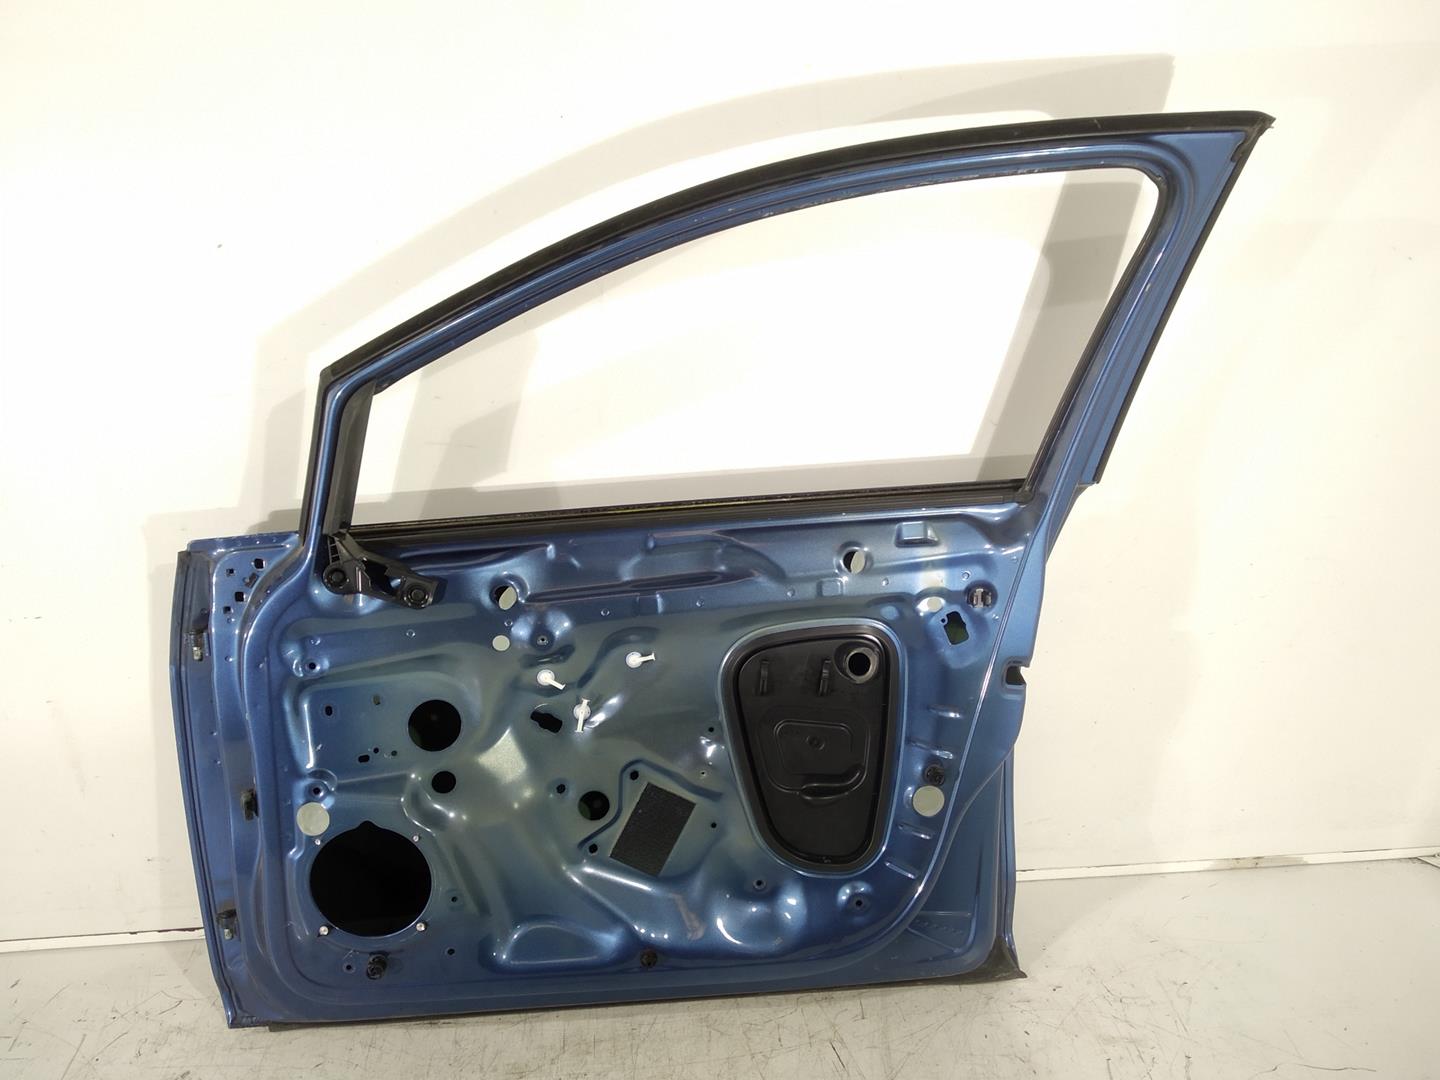 VOLKSWAGEN Golf 7 generation (2012-2024) Front Right Door 5G4831056AS, 5G4831056AS, 5G4831056AS 24515097